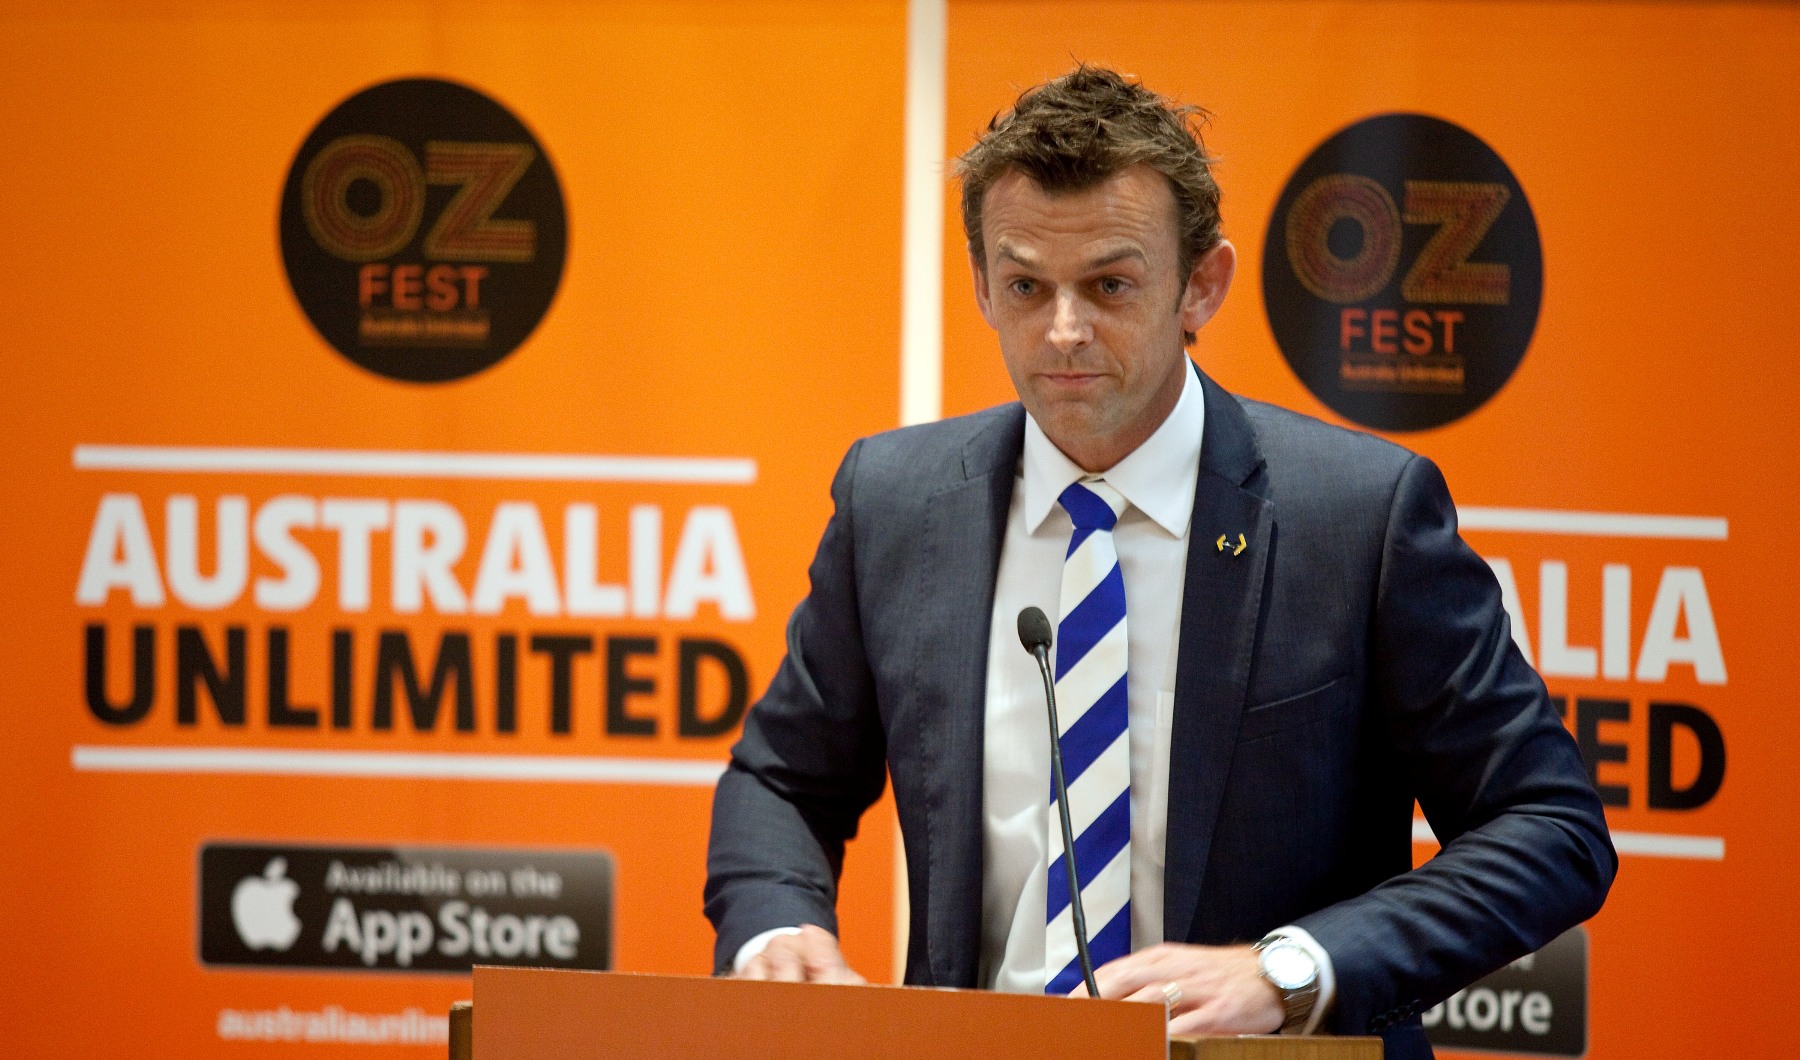 Adam Gilchrist at the launch of Australia Unlimited 2